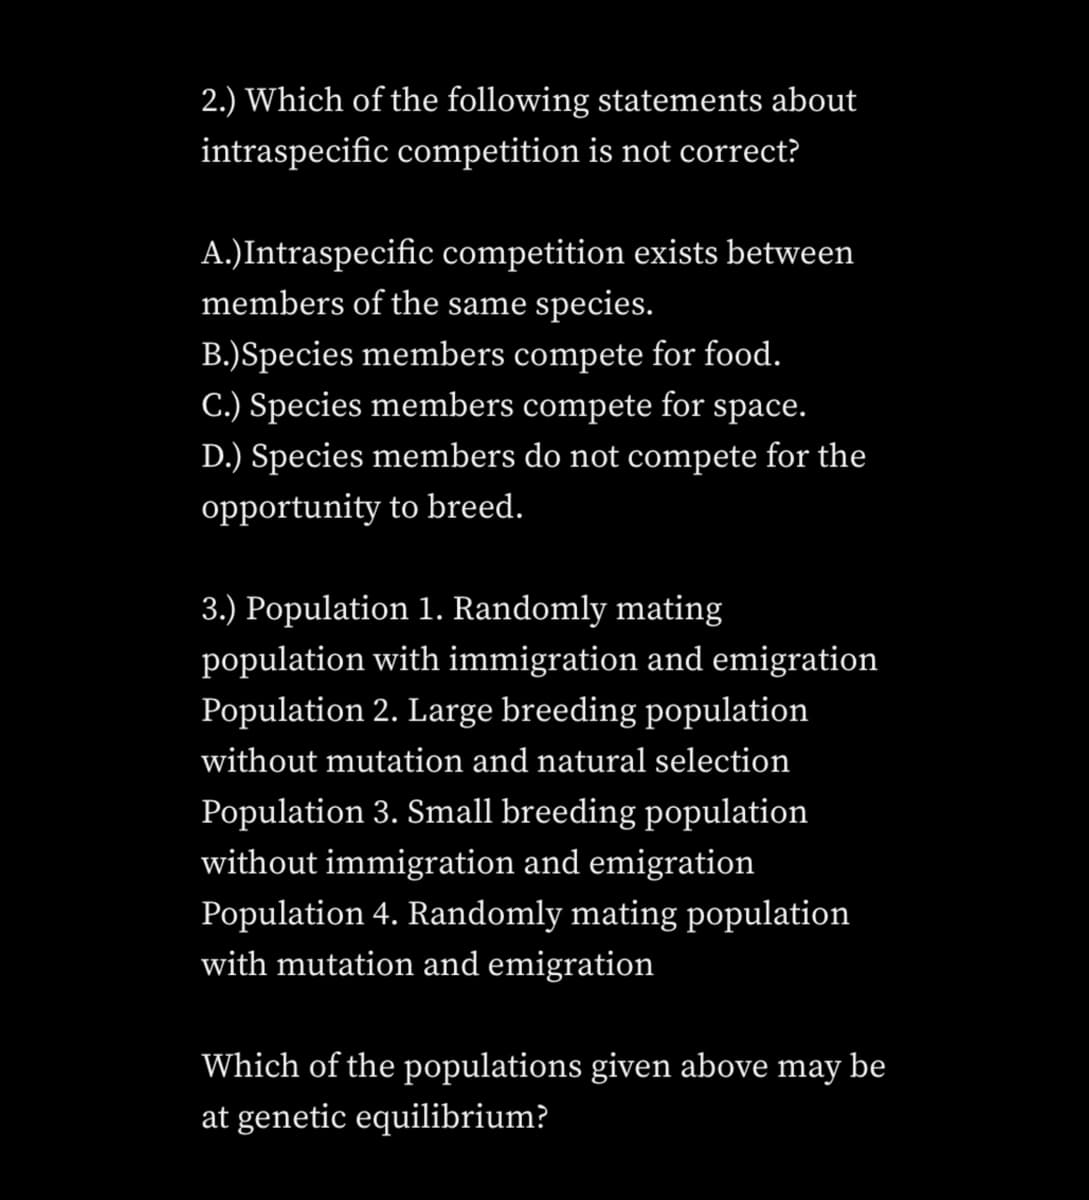 2.) Which of the following statements about
intraspecific competition is not correct?
A.)Intraspecific competition exists between
members of the same species.
B.)Species members compete for food.
C.) Species members compete for space.
D.) Species members do not compete for the
opportunity to breed.
3.) Population 1. Randomly mating
population with immigration and emigration
Population 2. Large breeding population
without mutation and natural selection
Population 3. Small breeding population
without immigration and emigration
Population 4. Randomly mating population
with mutation and emigration
Which of the populations given above may be
at genetic equilibrium?
